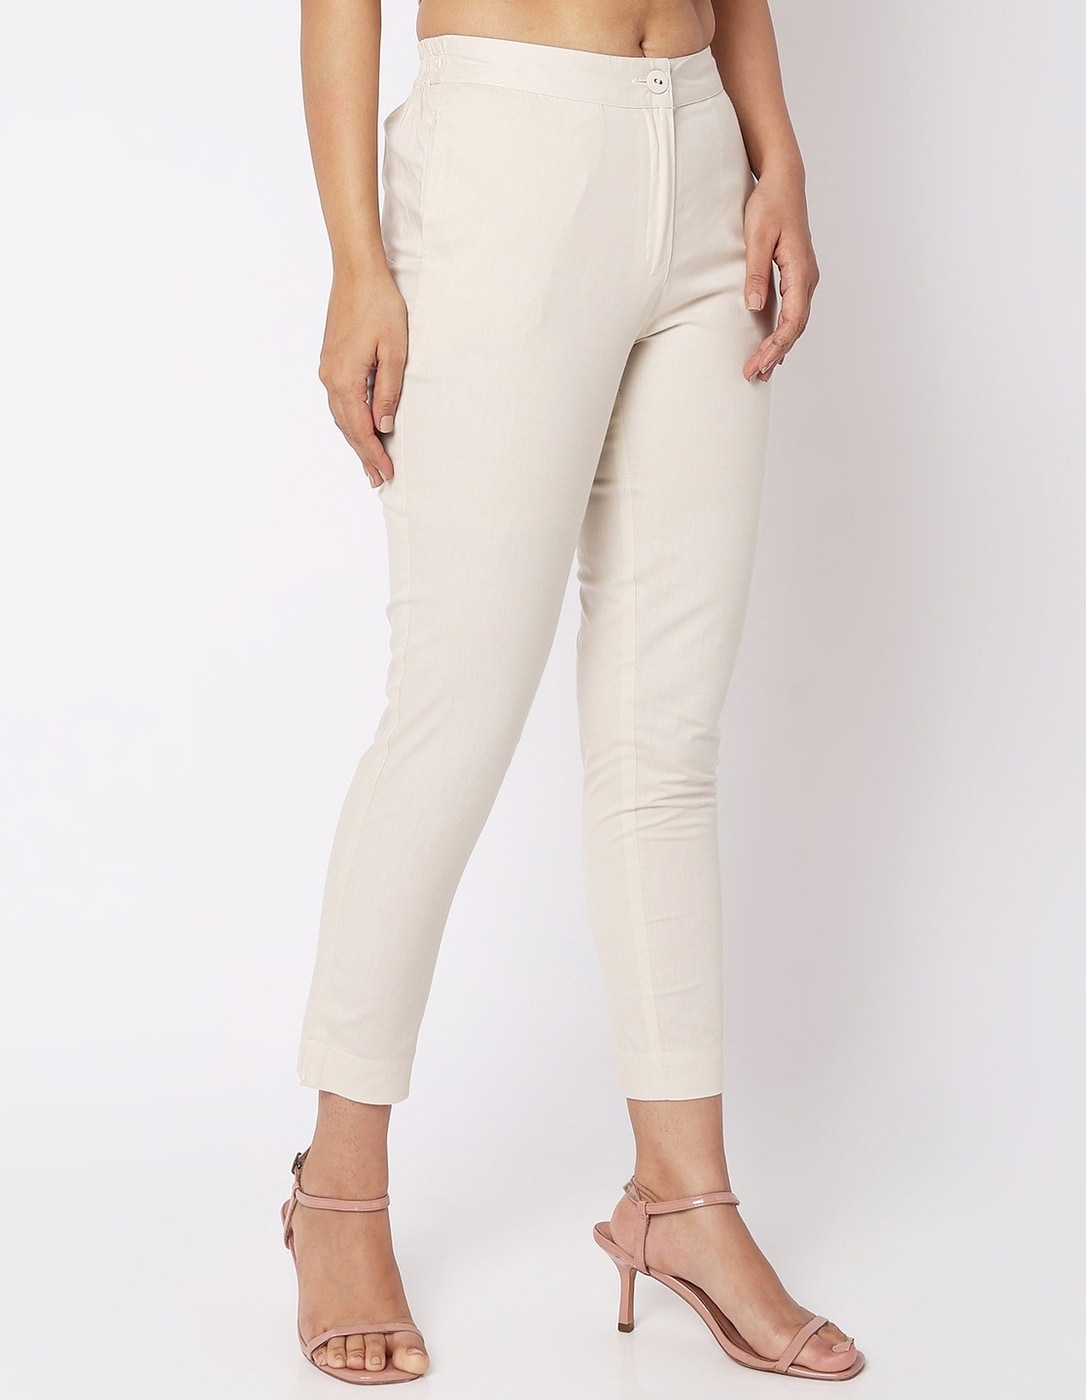 Buy Cream and Beige Combo of 2 Women Straight Trousers Cotton for Best  Price, Reviews, Free Shipping